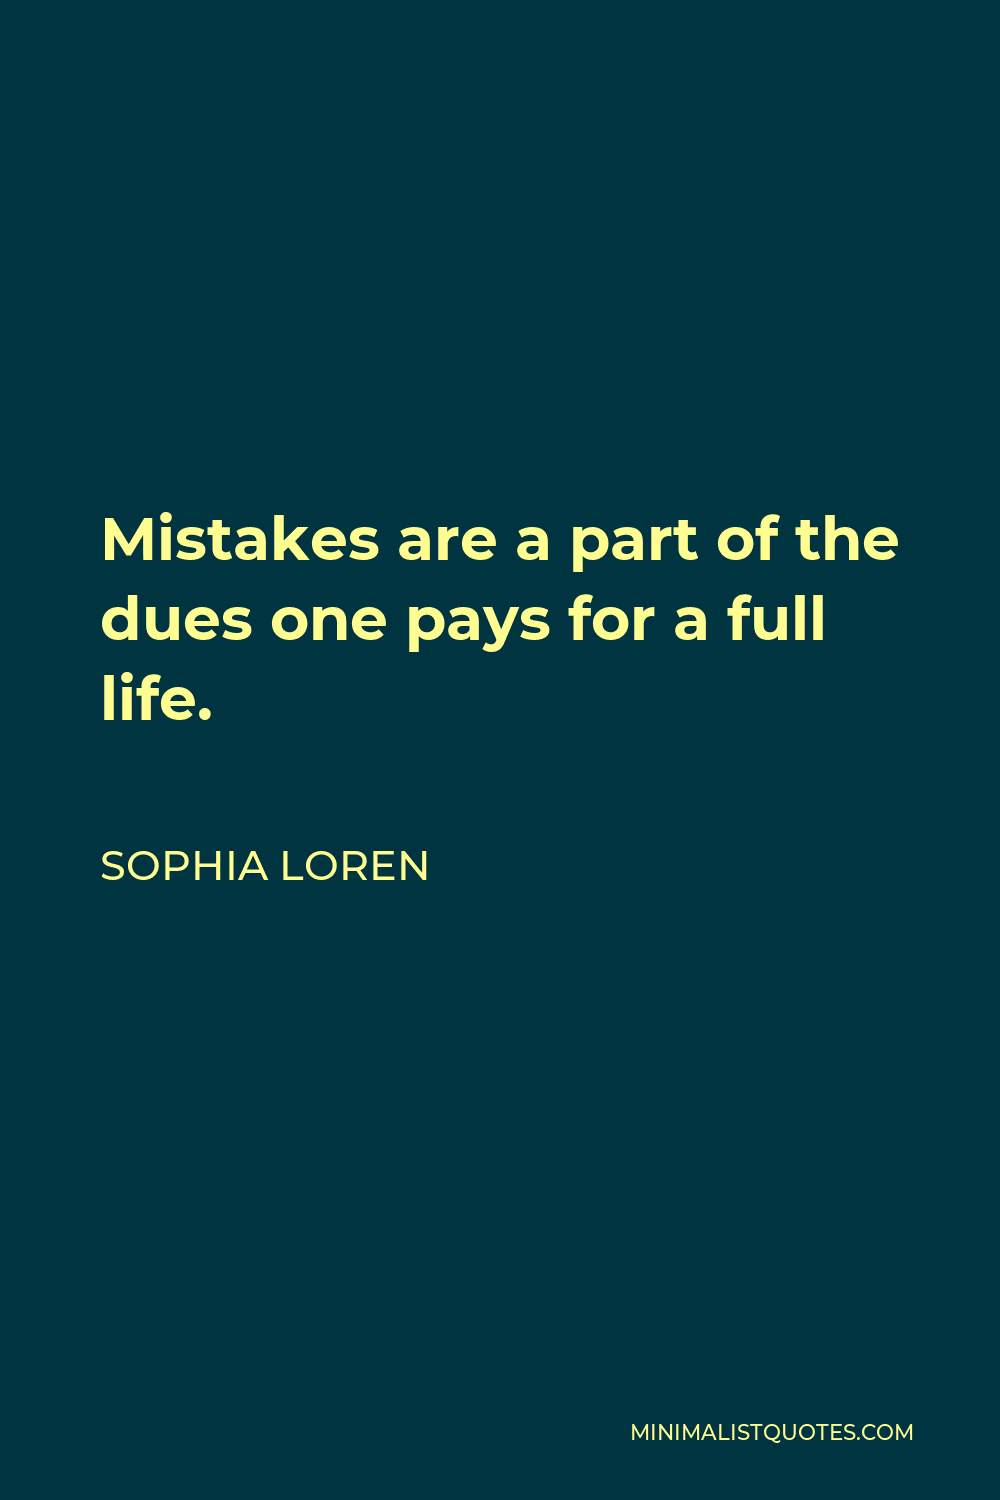 Sophia Loren Quote - Mistakes are a part of the dues one pays for a full life.